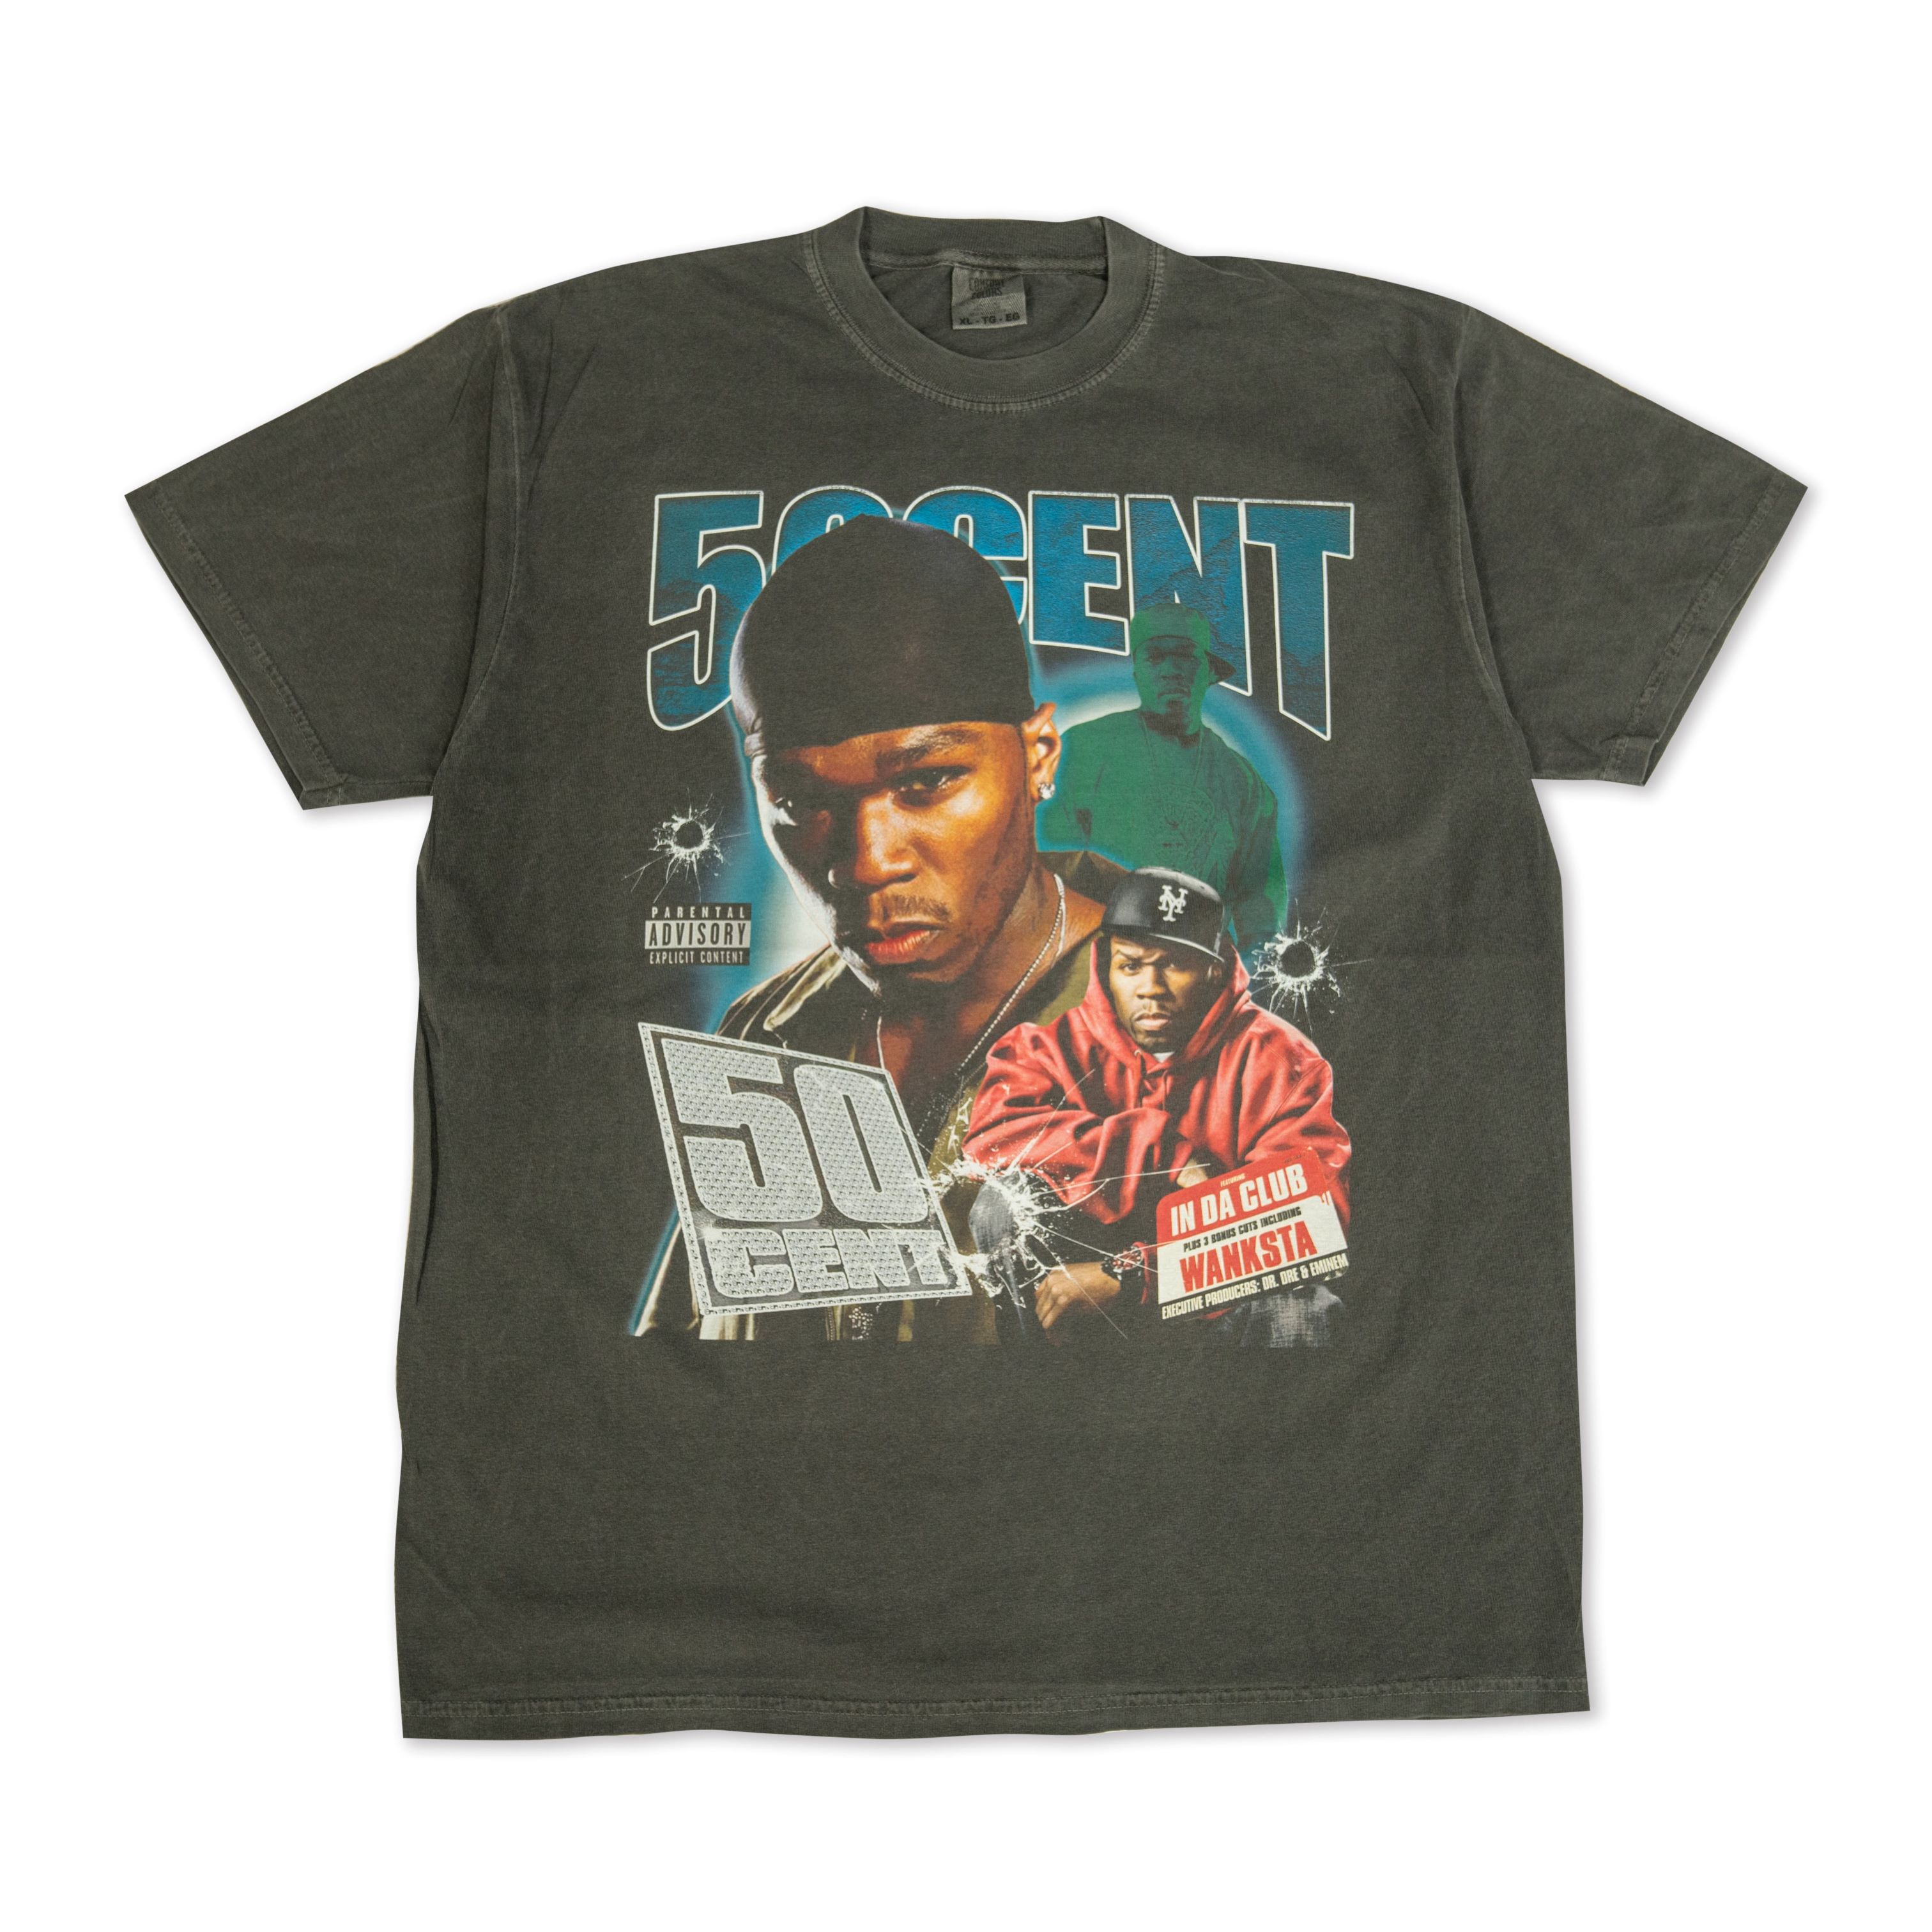 50CENT BOOTLEGE RAPTEE (チャコール) フィフティー・セント 送料無料